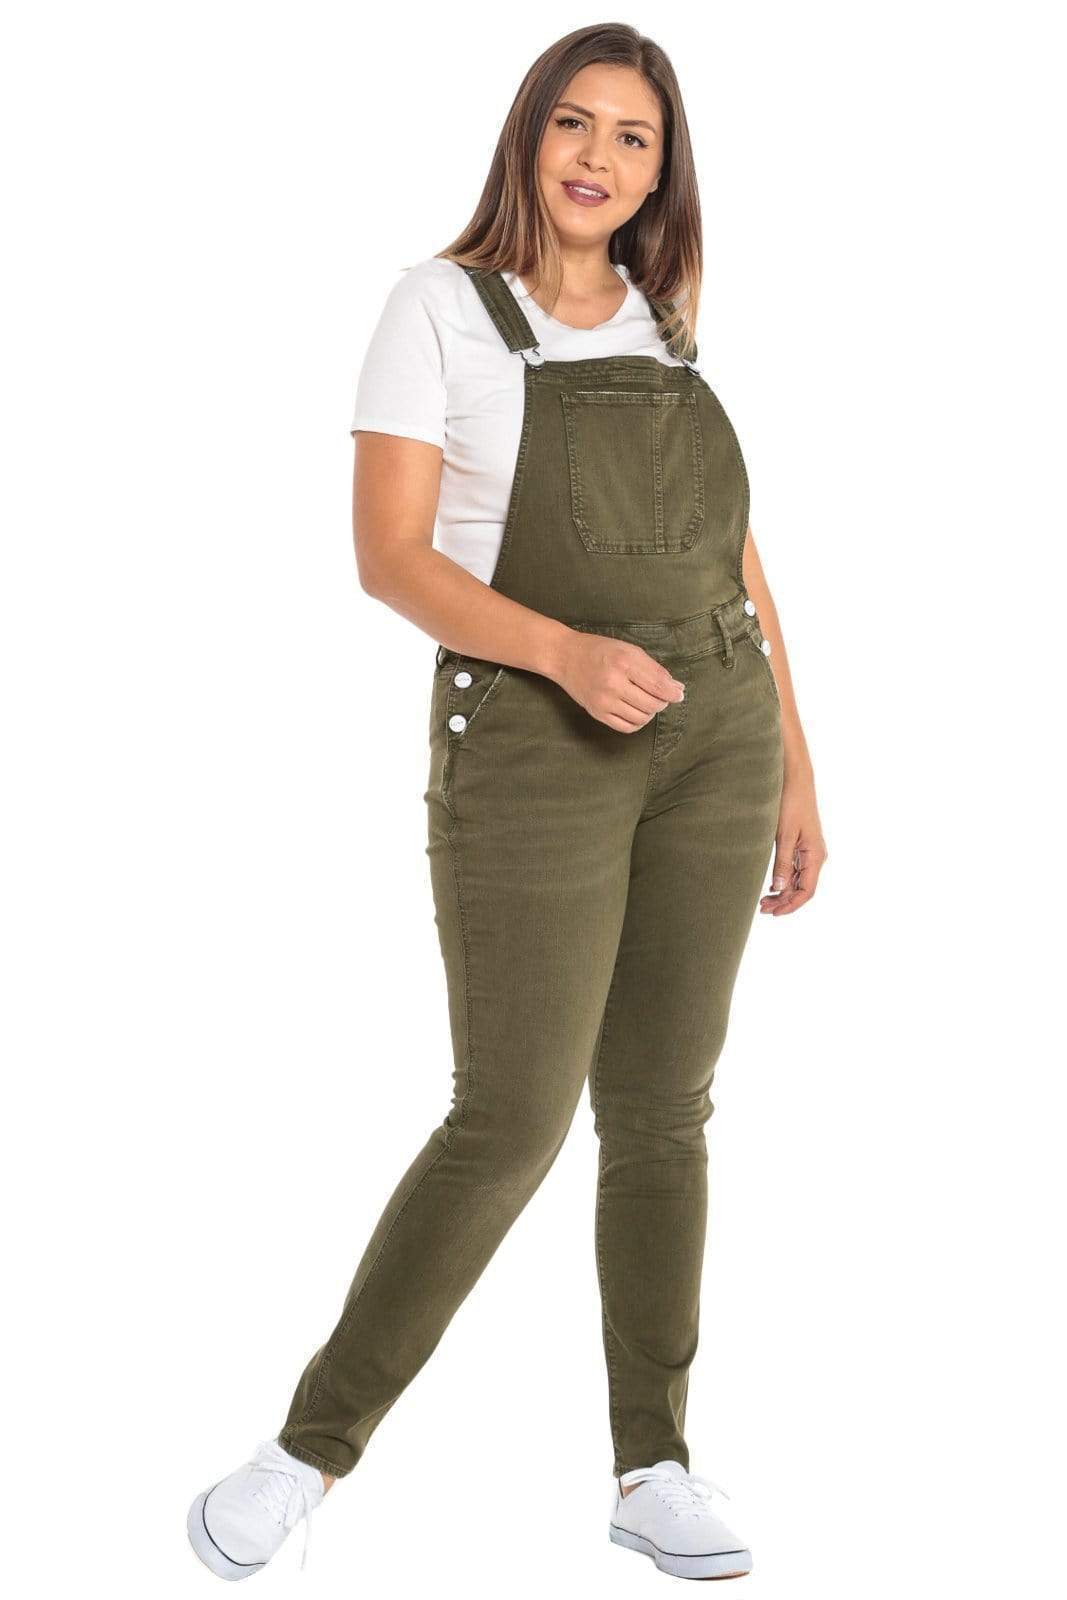 8 Places to Buy Plus Size Overalls | Where to Shop - The Huntswoman